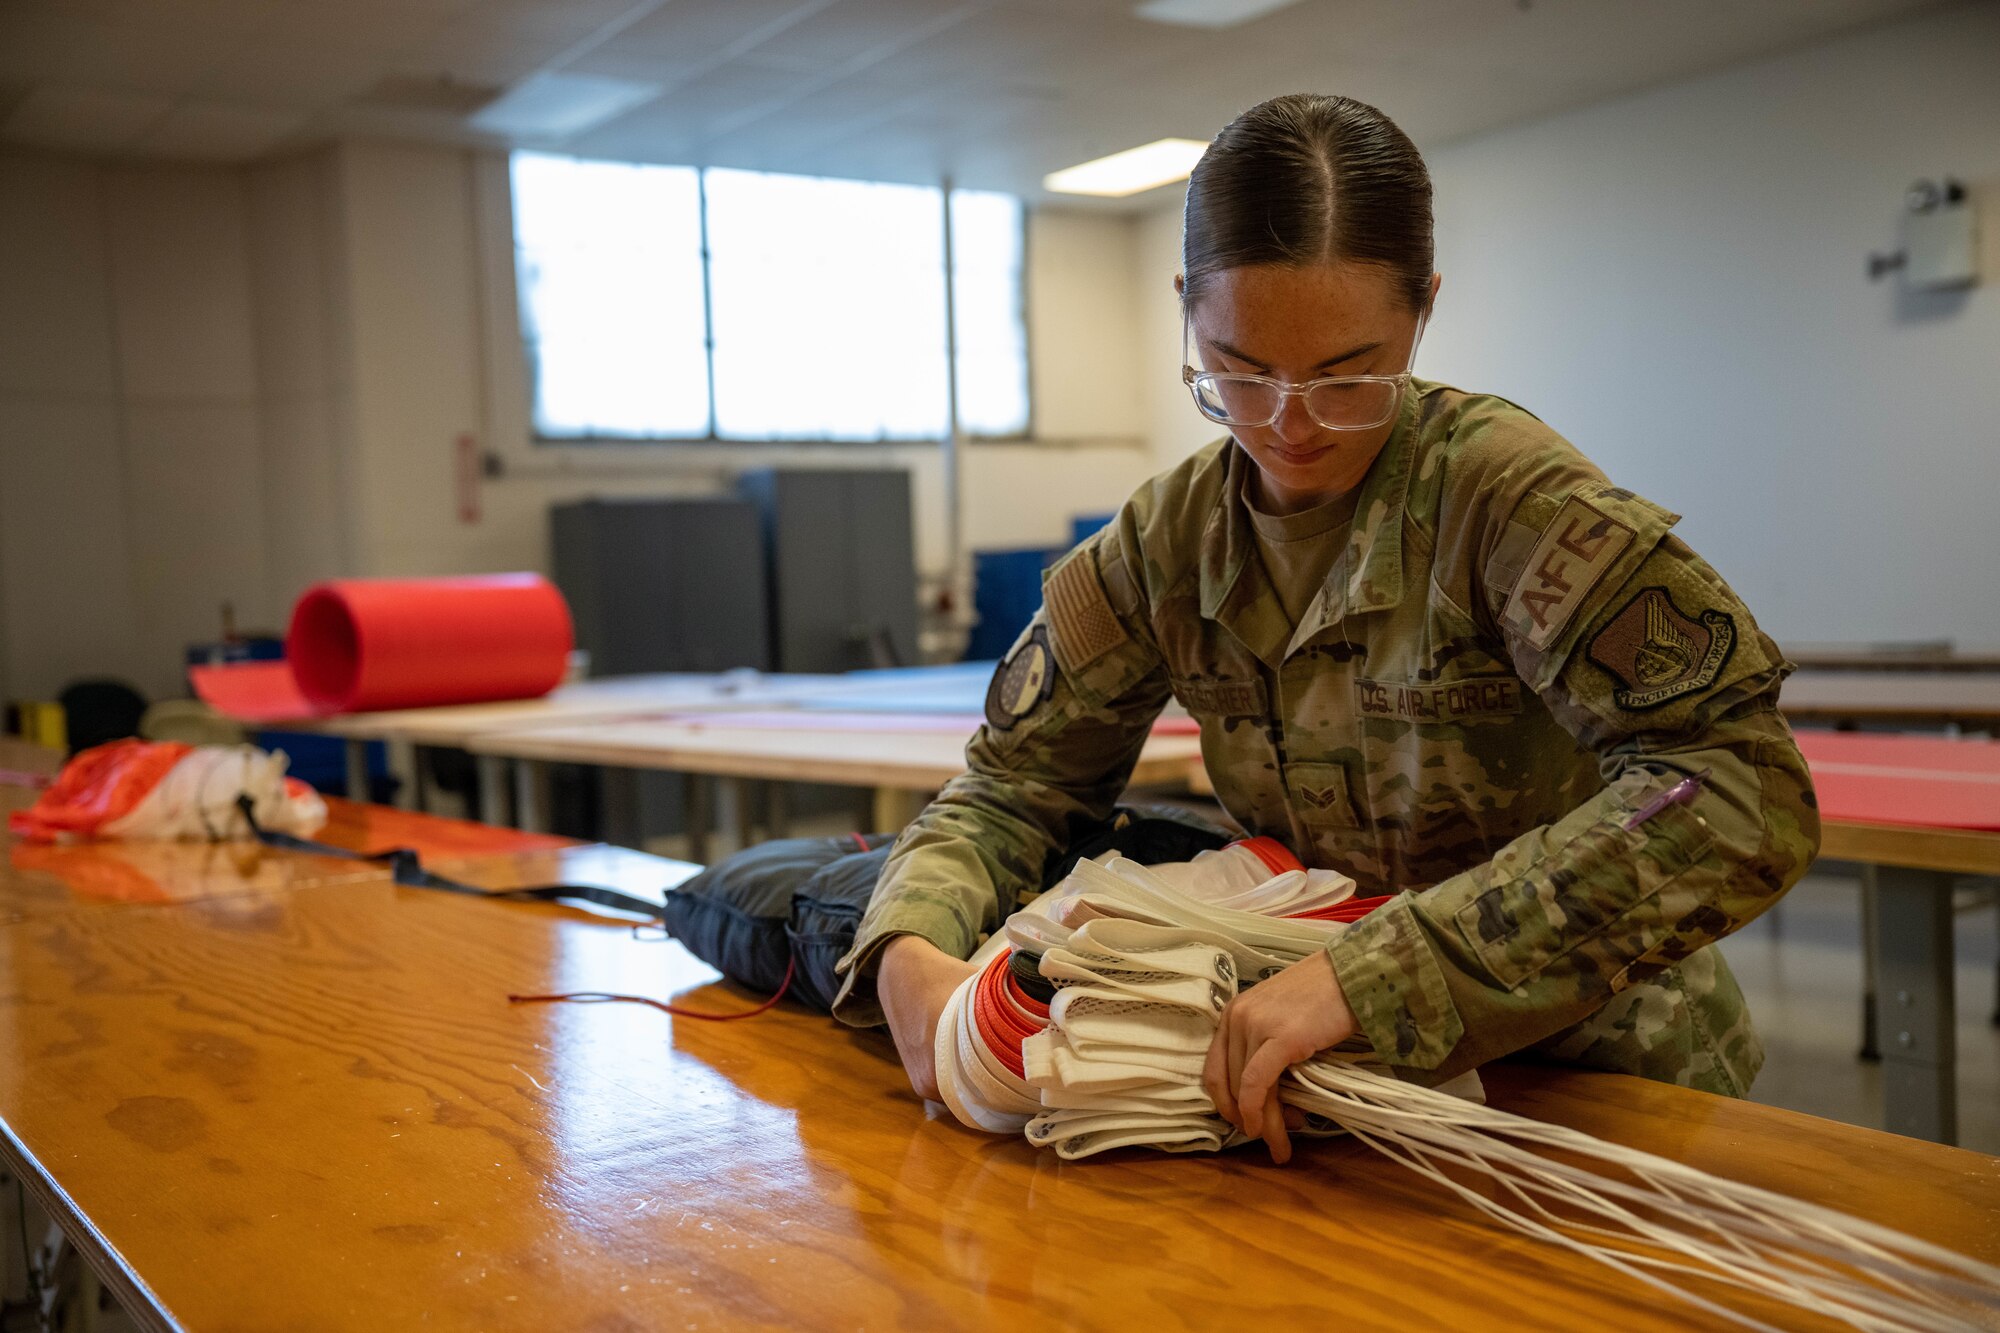 Senior Airman Karlie Kometscher, 15th Operations Support Squadron aircrew flight equipment journeyman, works on a Butler Parachute BA-30 low profile parachute system at Joint Base Pearl Harbor-Hickam, Hawaii, Jan. 11, 2023. AFE technicians are responsible for all emergency floatation devices and parachutes on Hickam aircraft. (U.S. Air Force photo by Senior Airman Makensie Cooper)